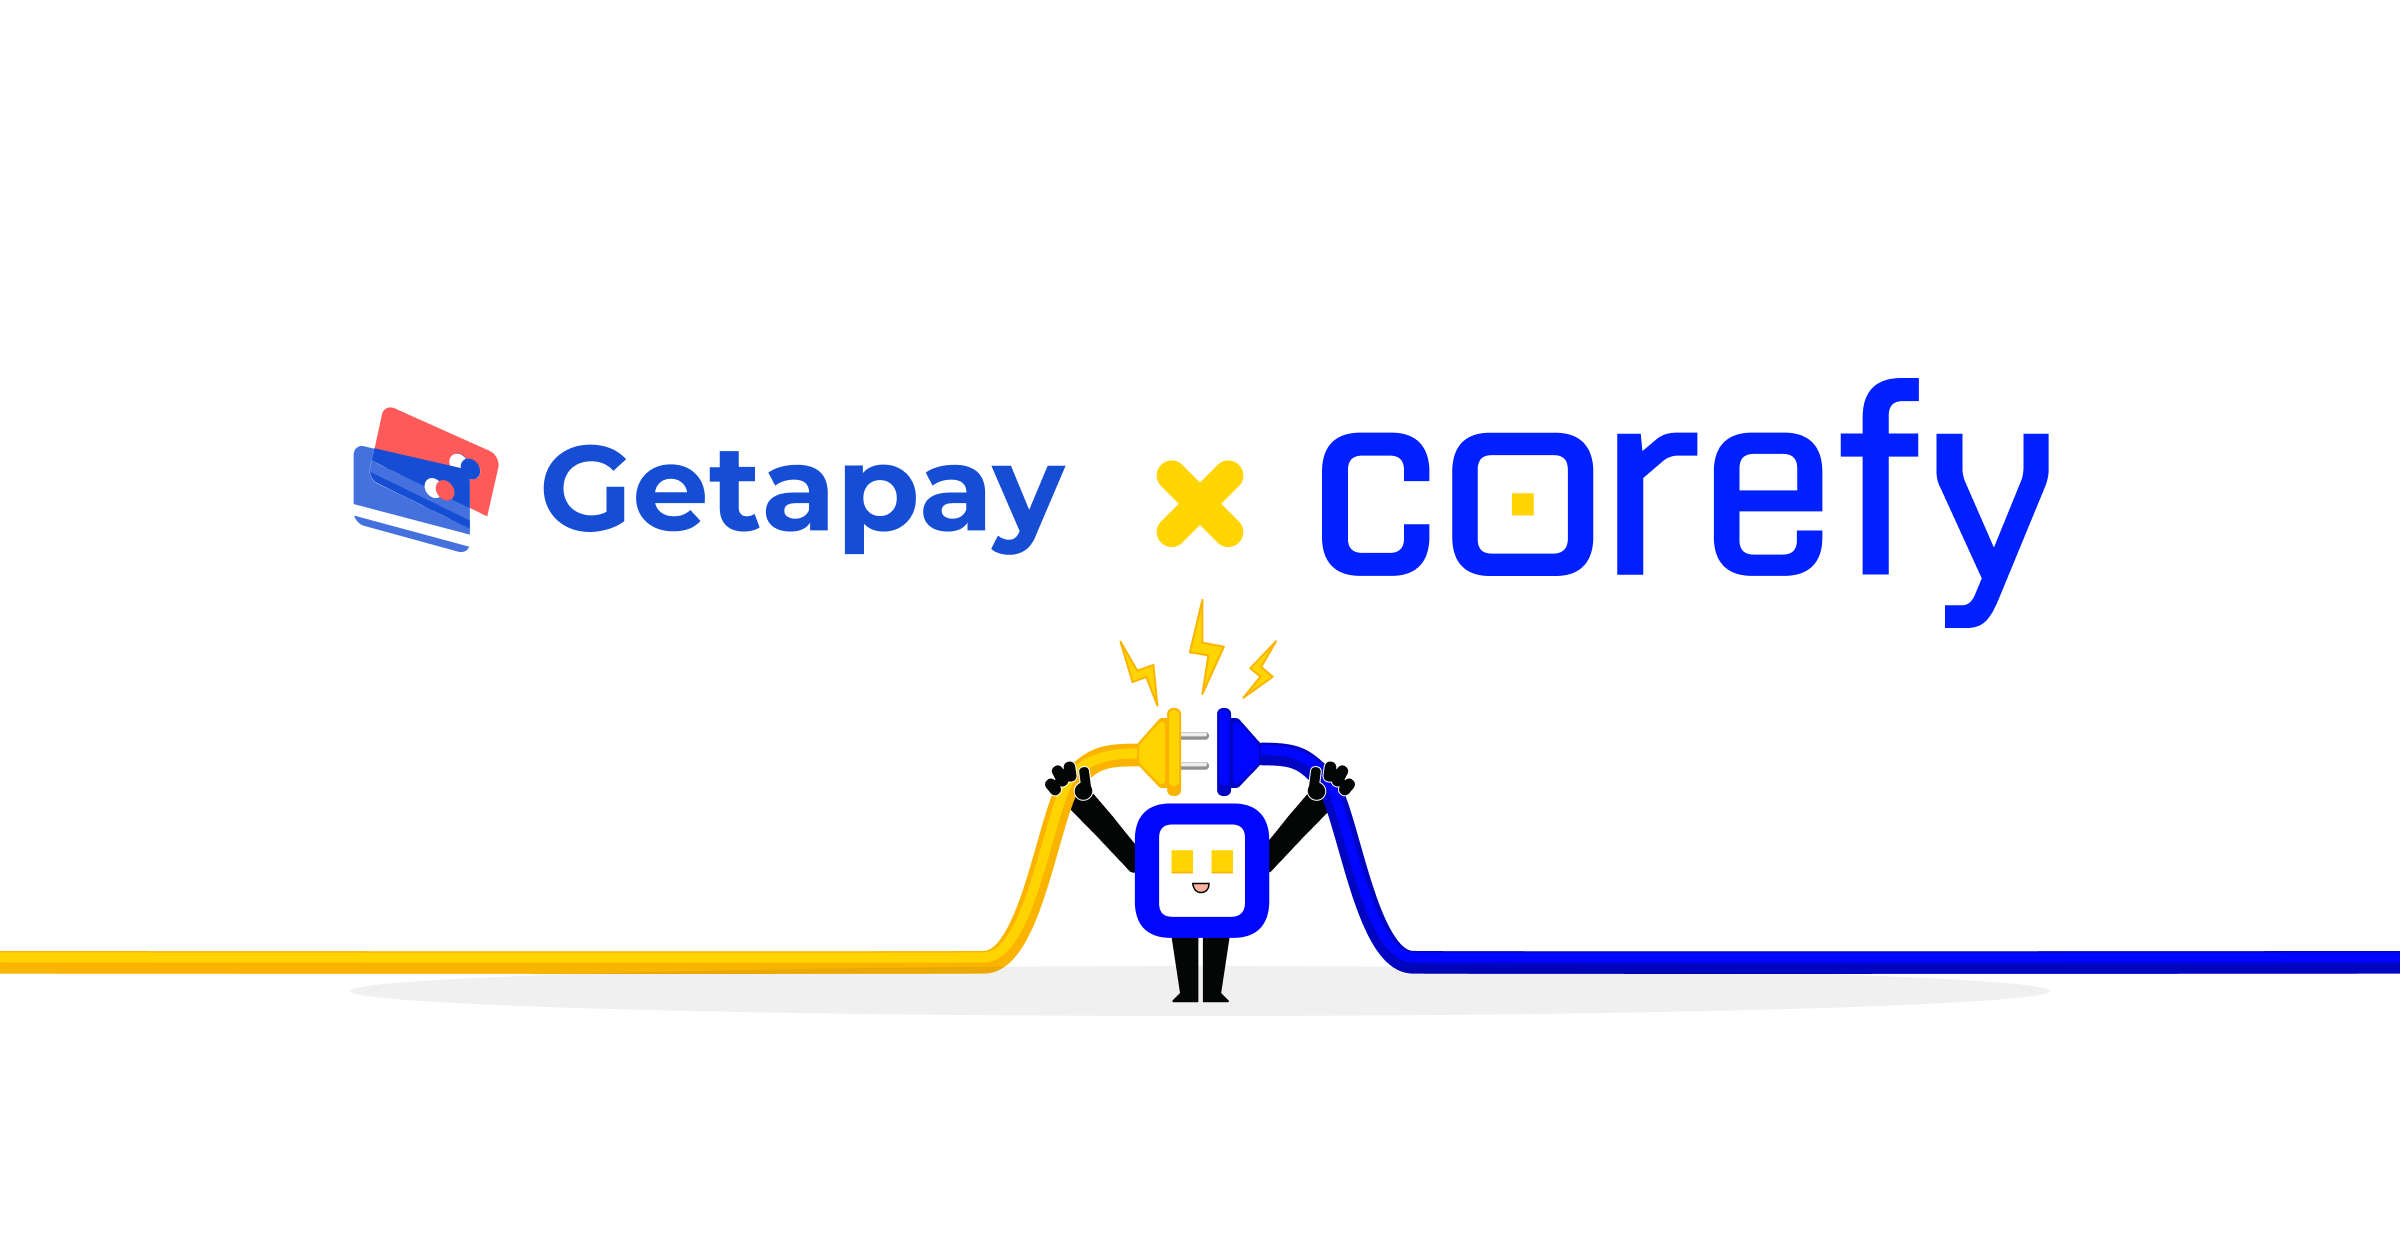 New integration with Getapay